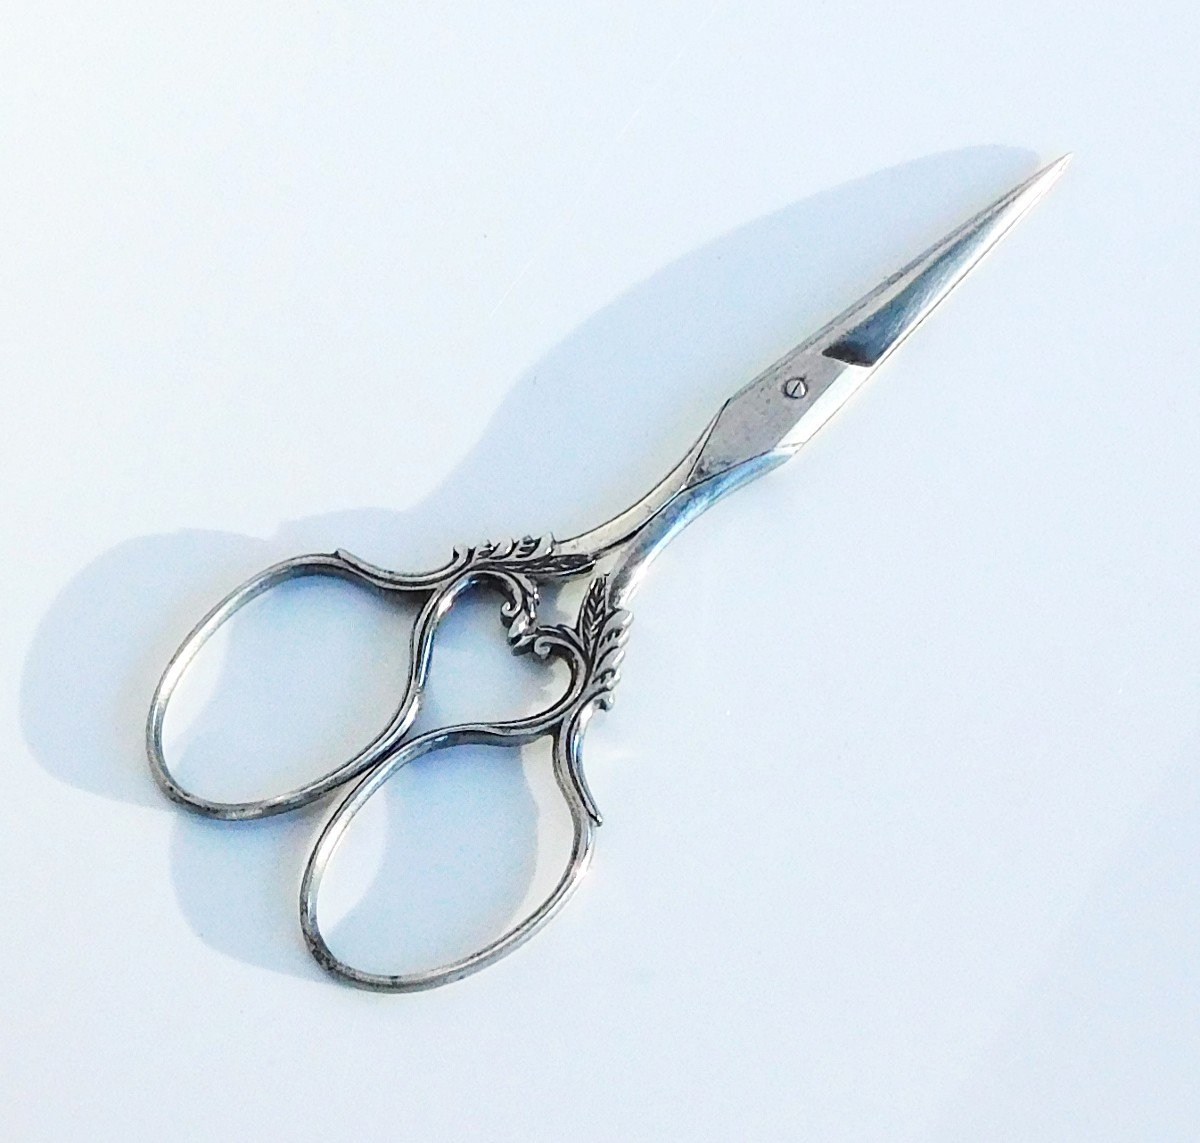 Pair Of Old Embroidery Steel Scissors Sewing Necessary Late 19th Century Early 20th Century-photo-4